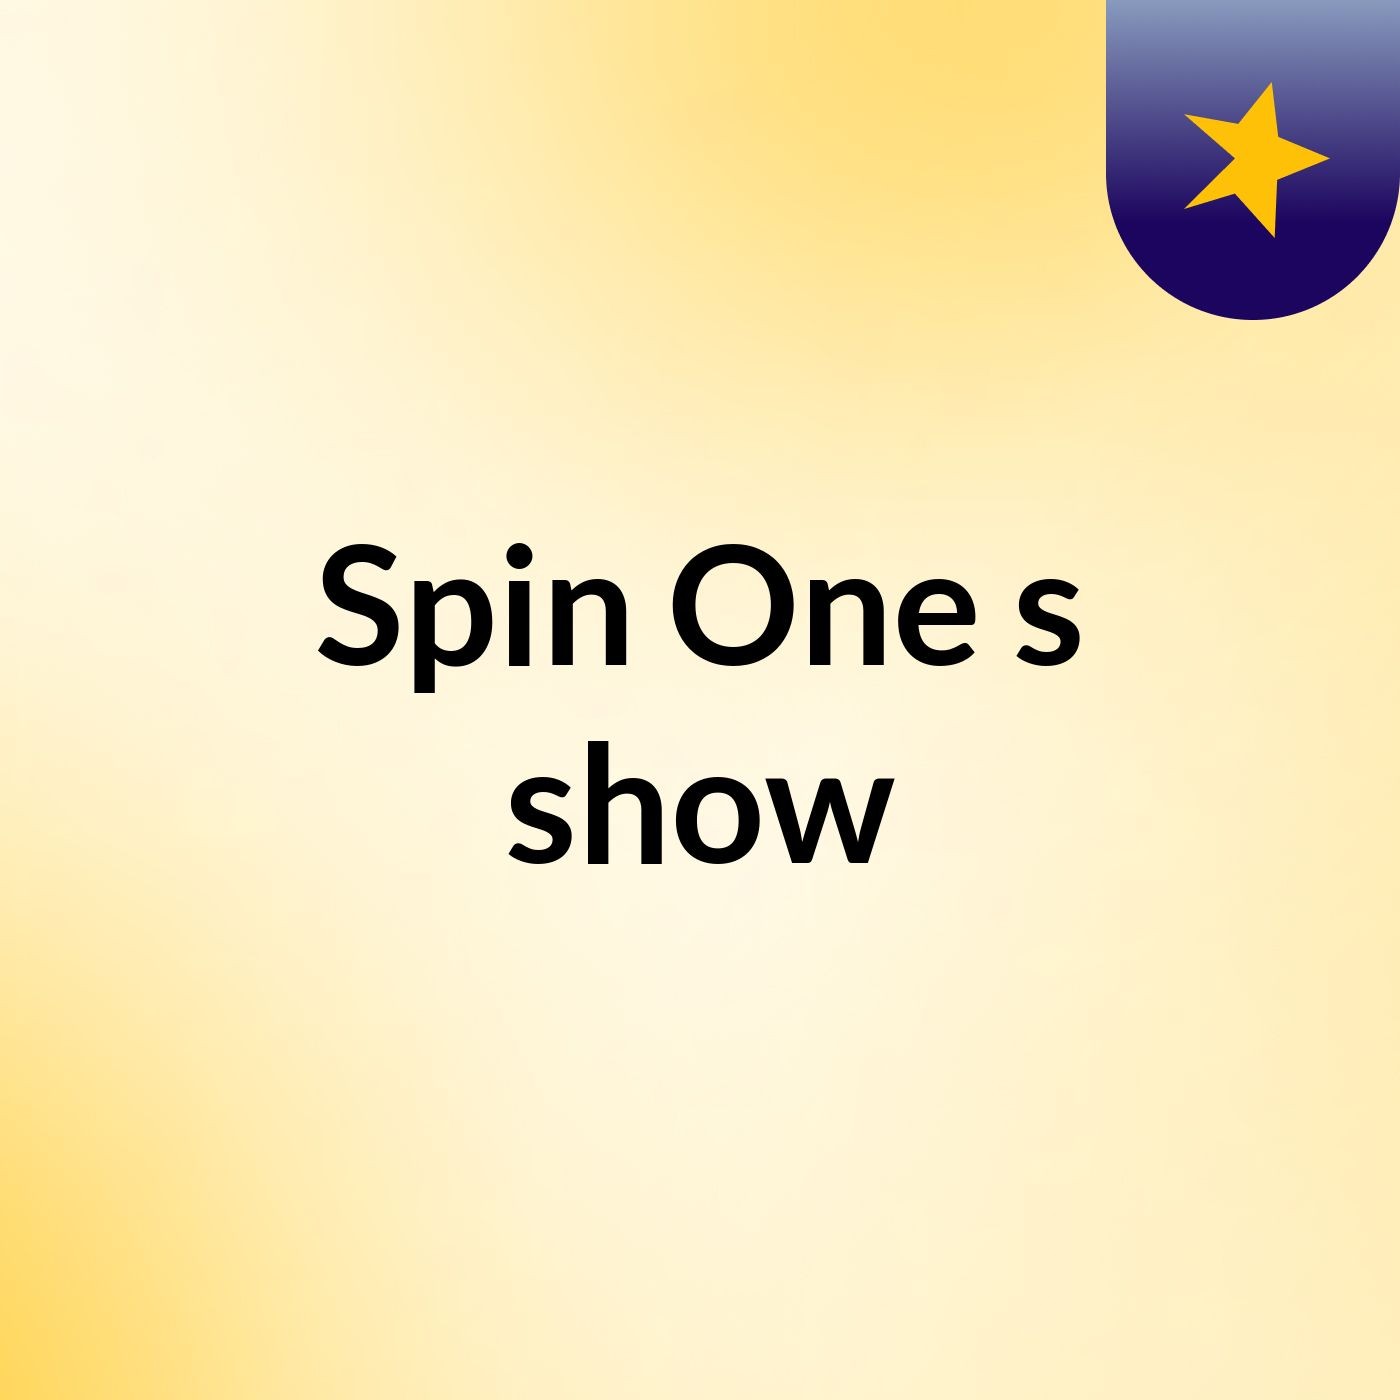 Spin One's show